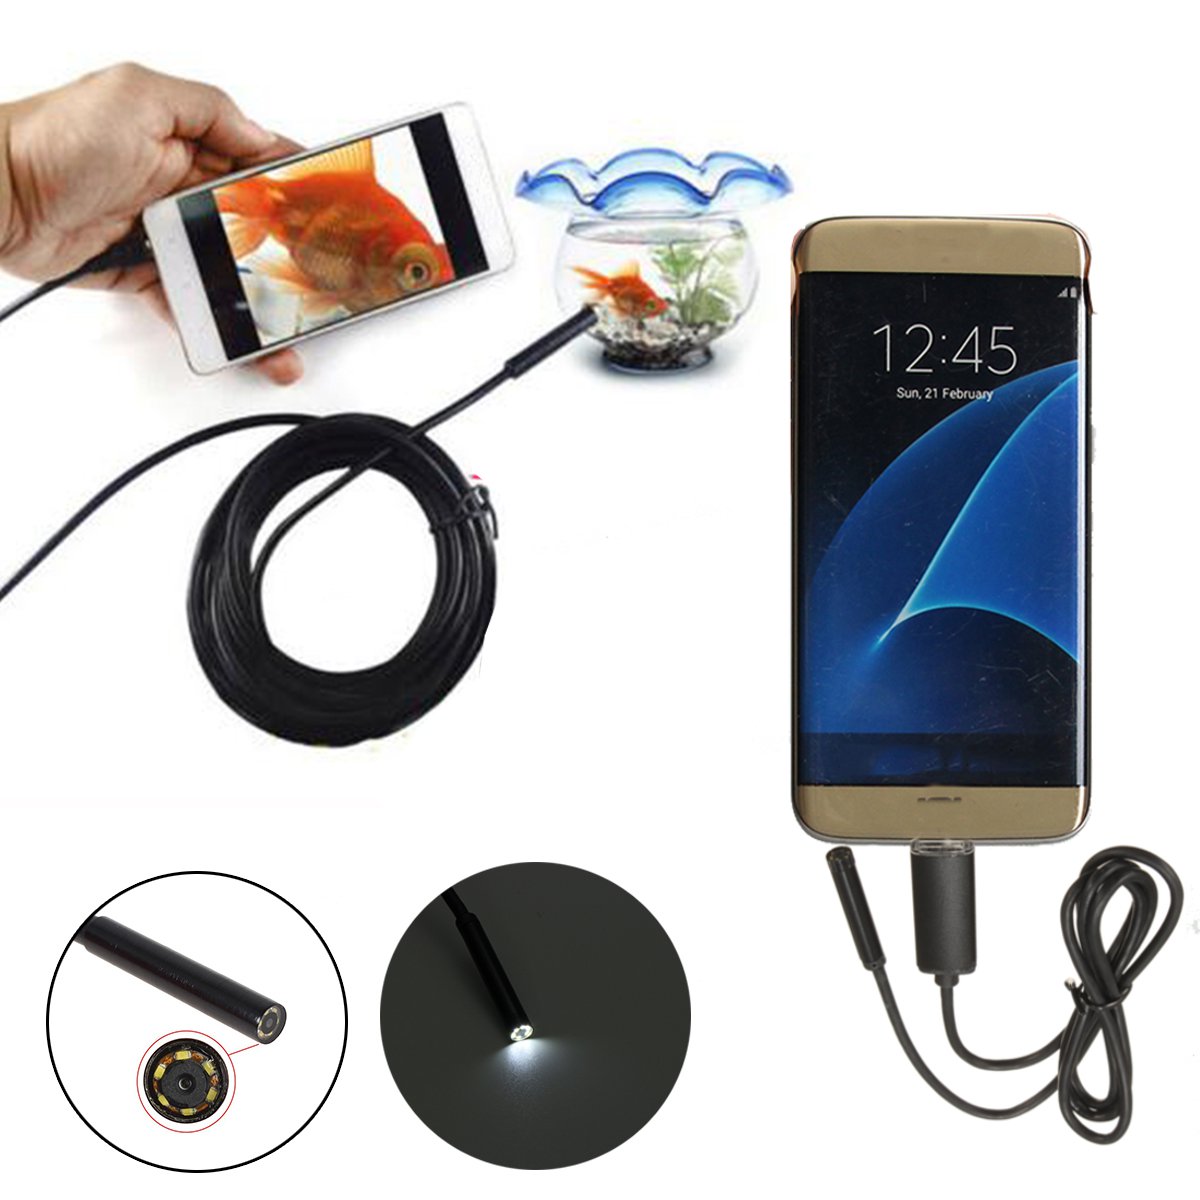 

7mm 2 In1 USB Endoscope Borescope Inspection Camera for Phone Tablet PC